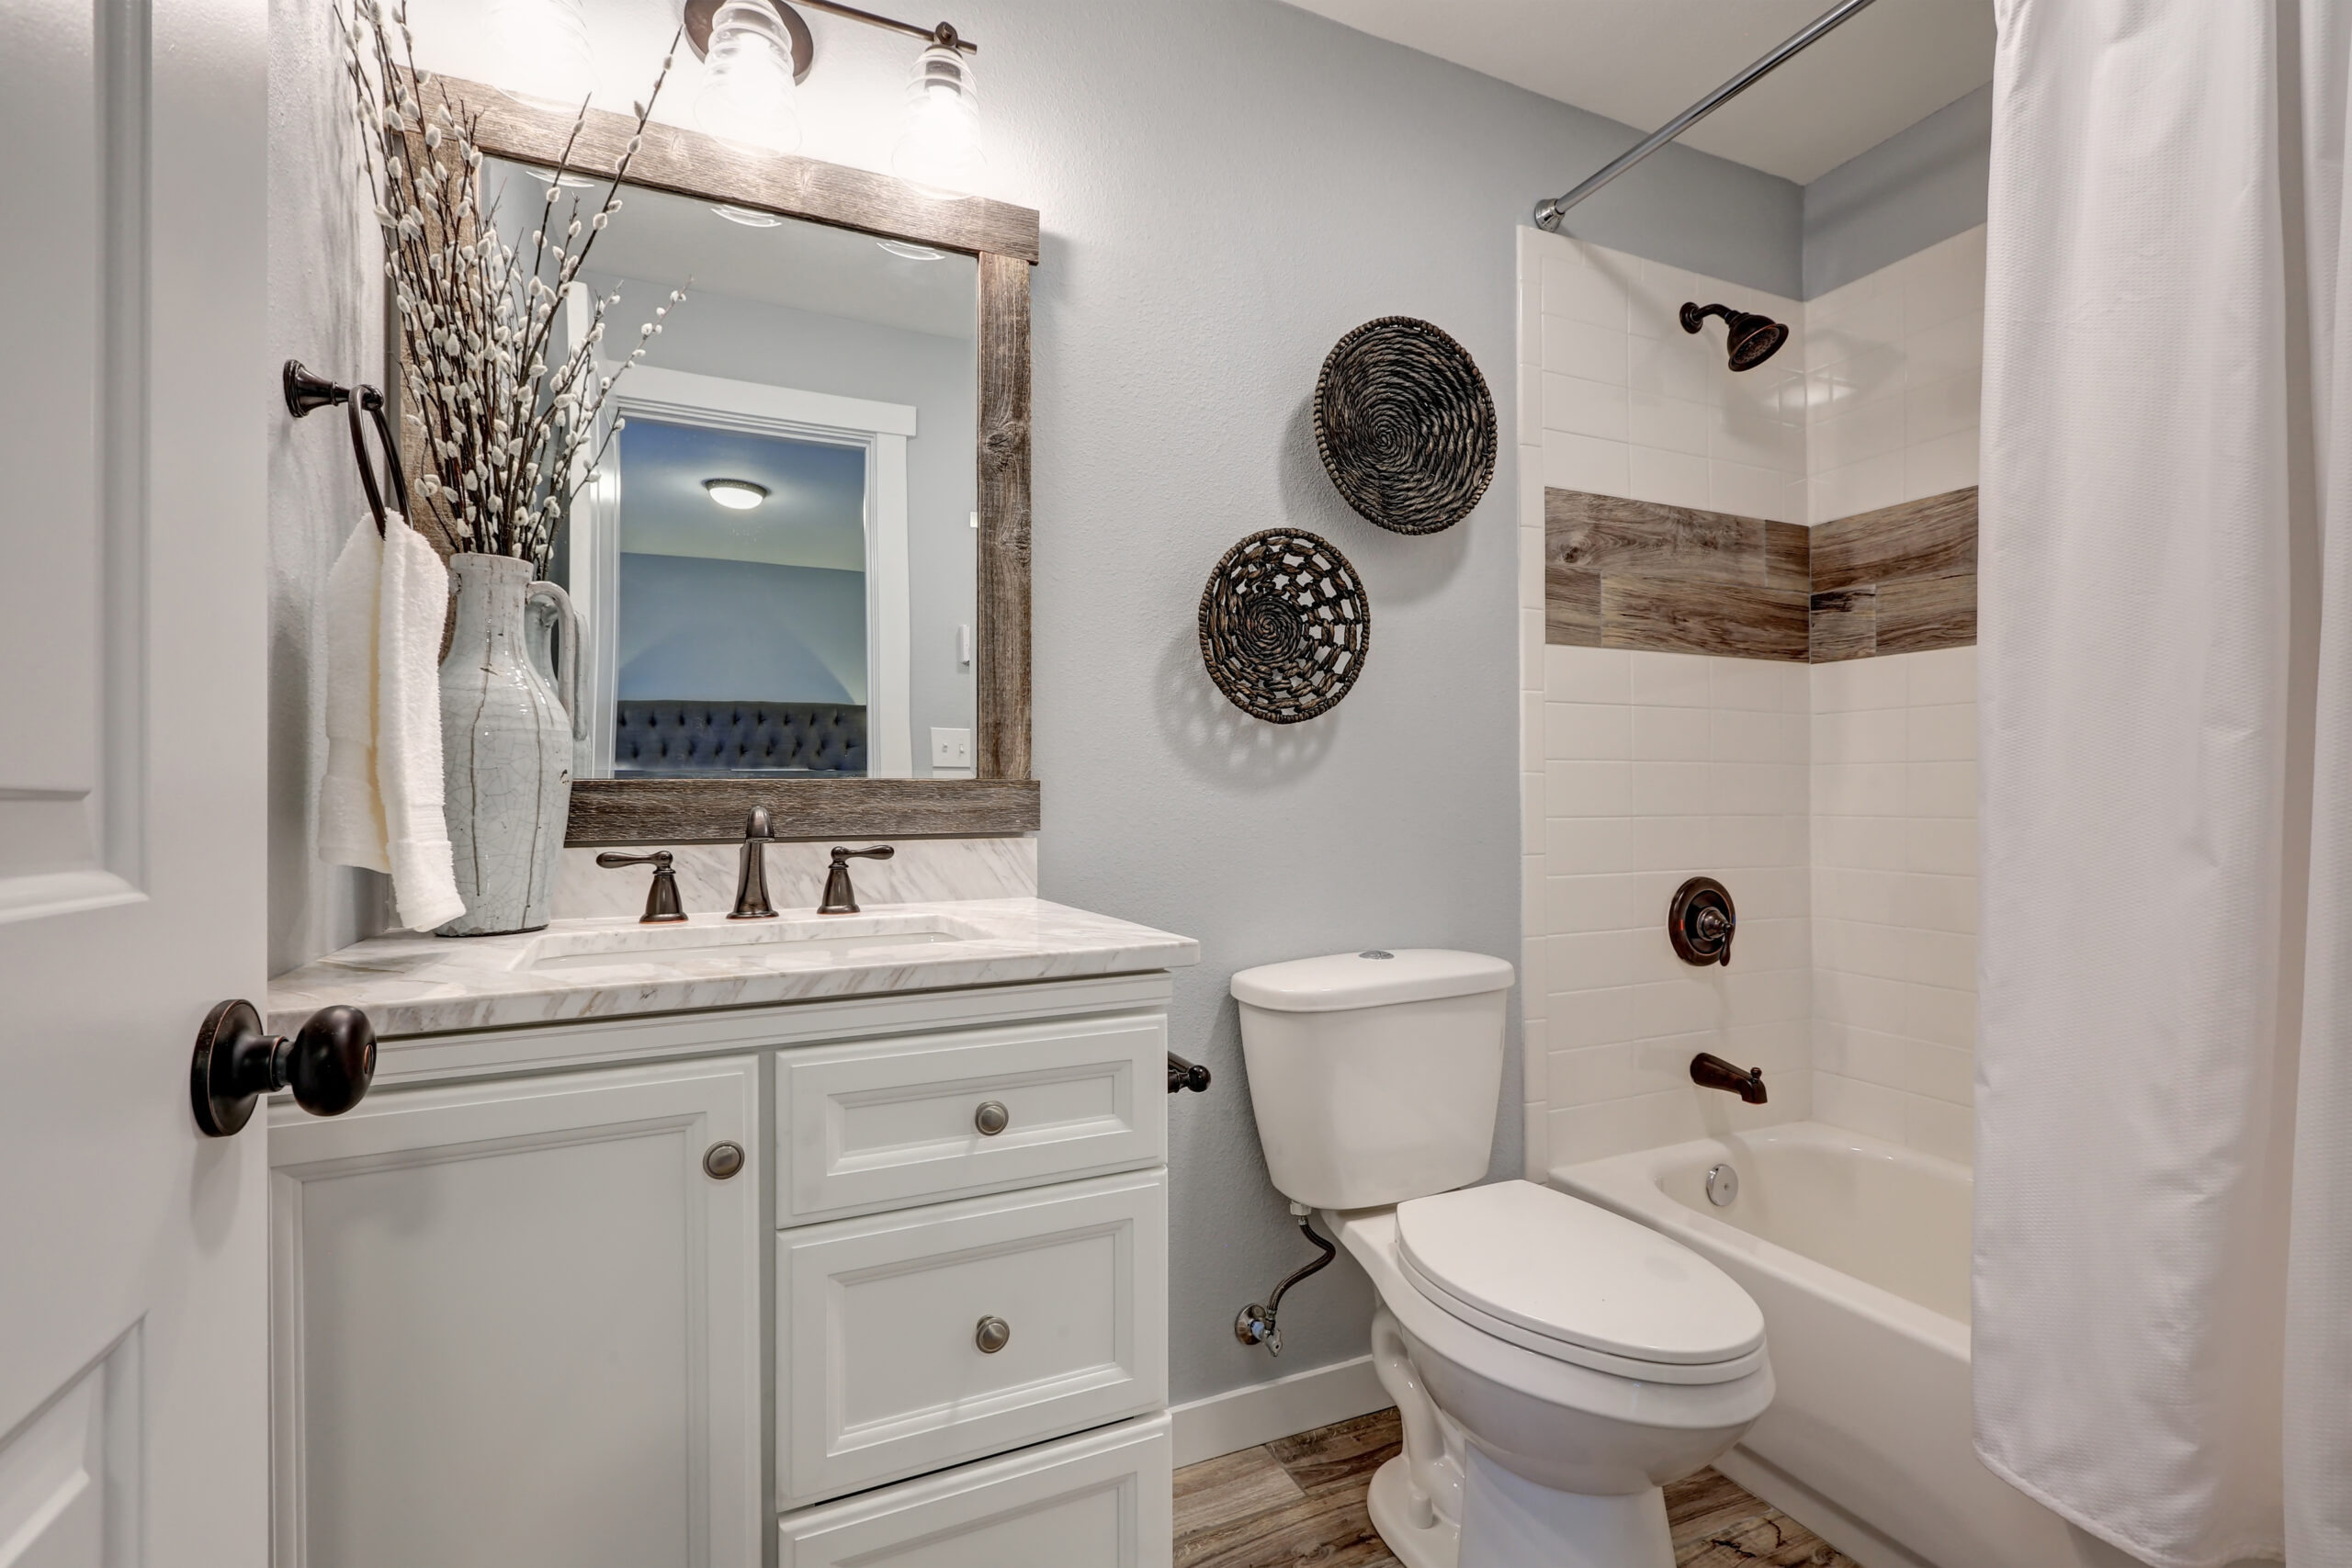 9 Clever Rental Apartment Bathroom Decorating Ideas You Need to Try!